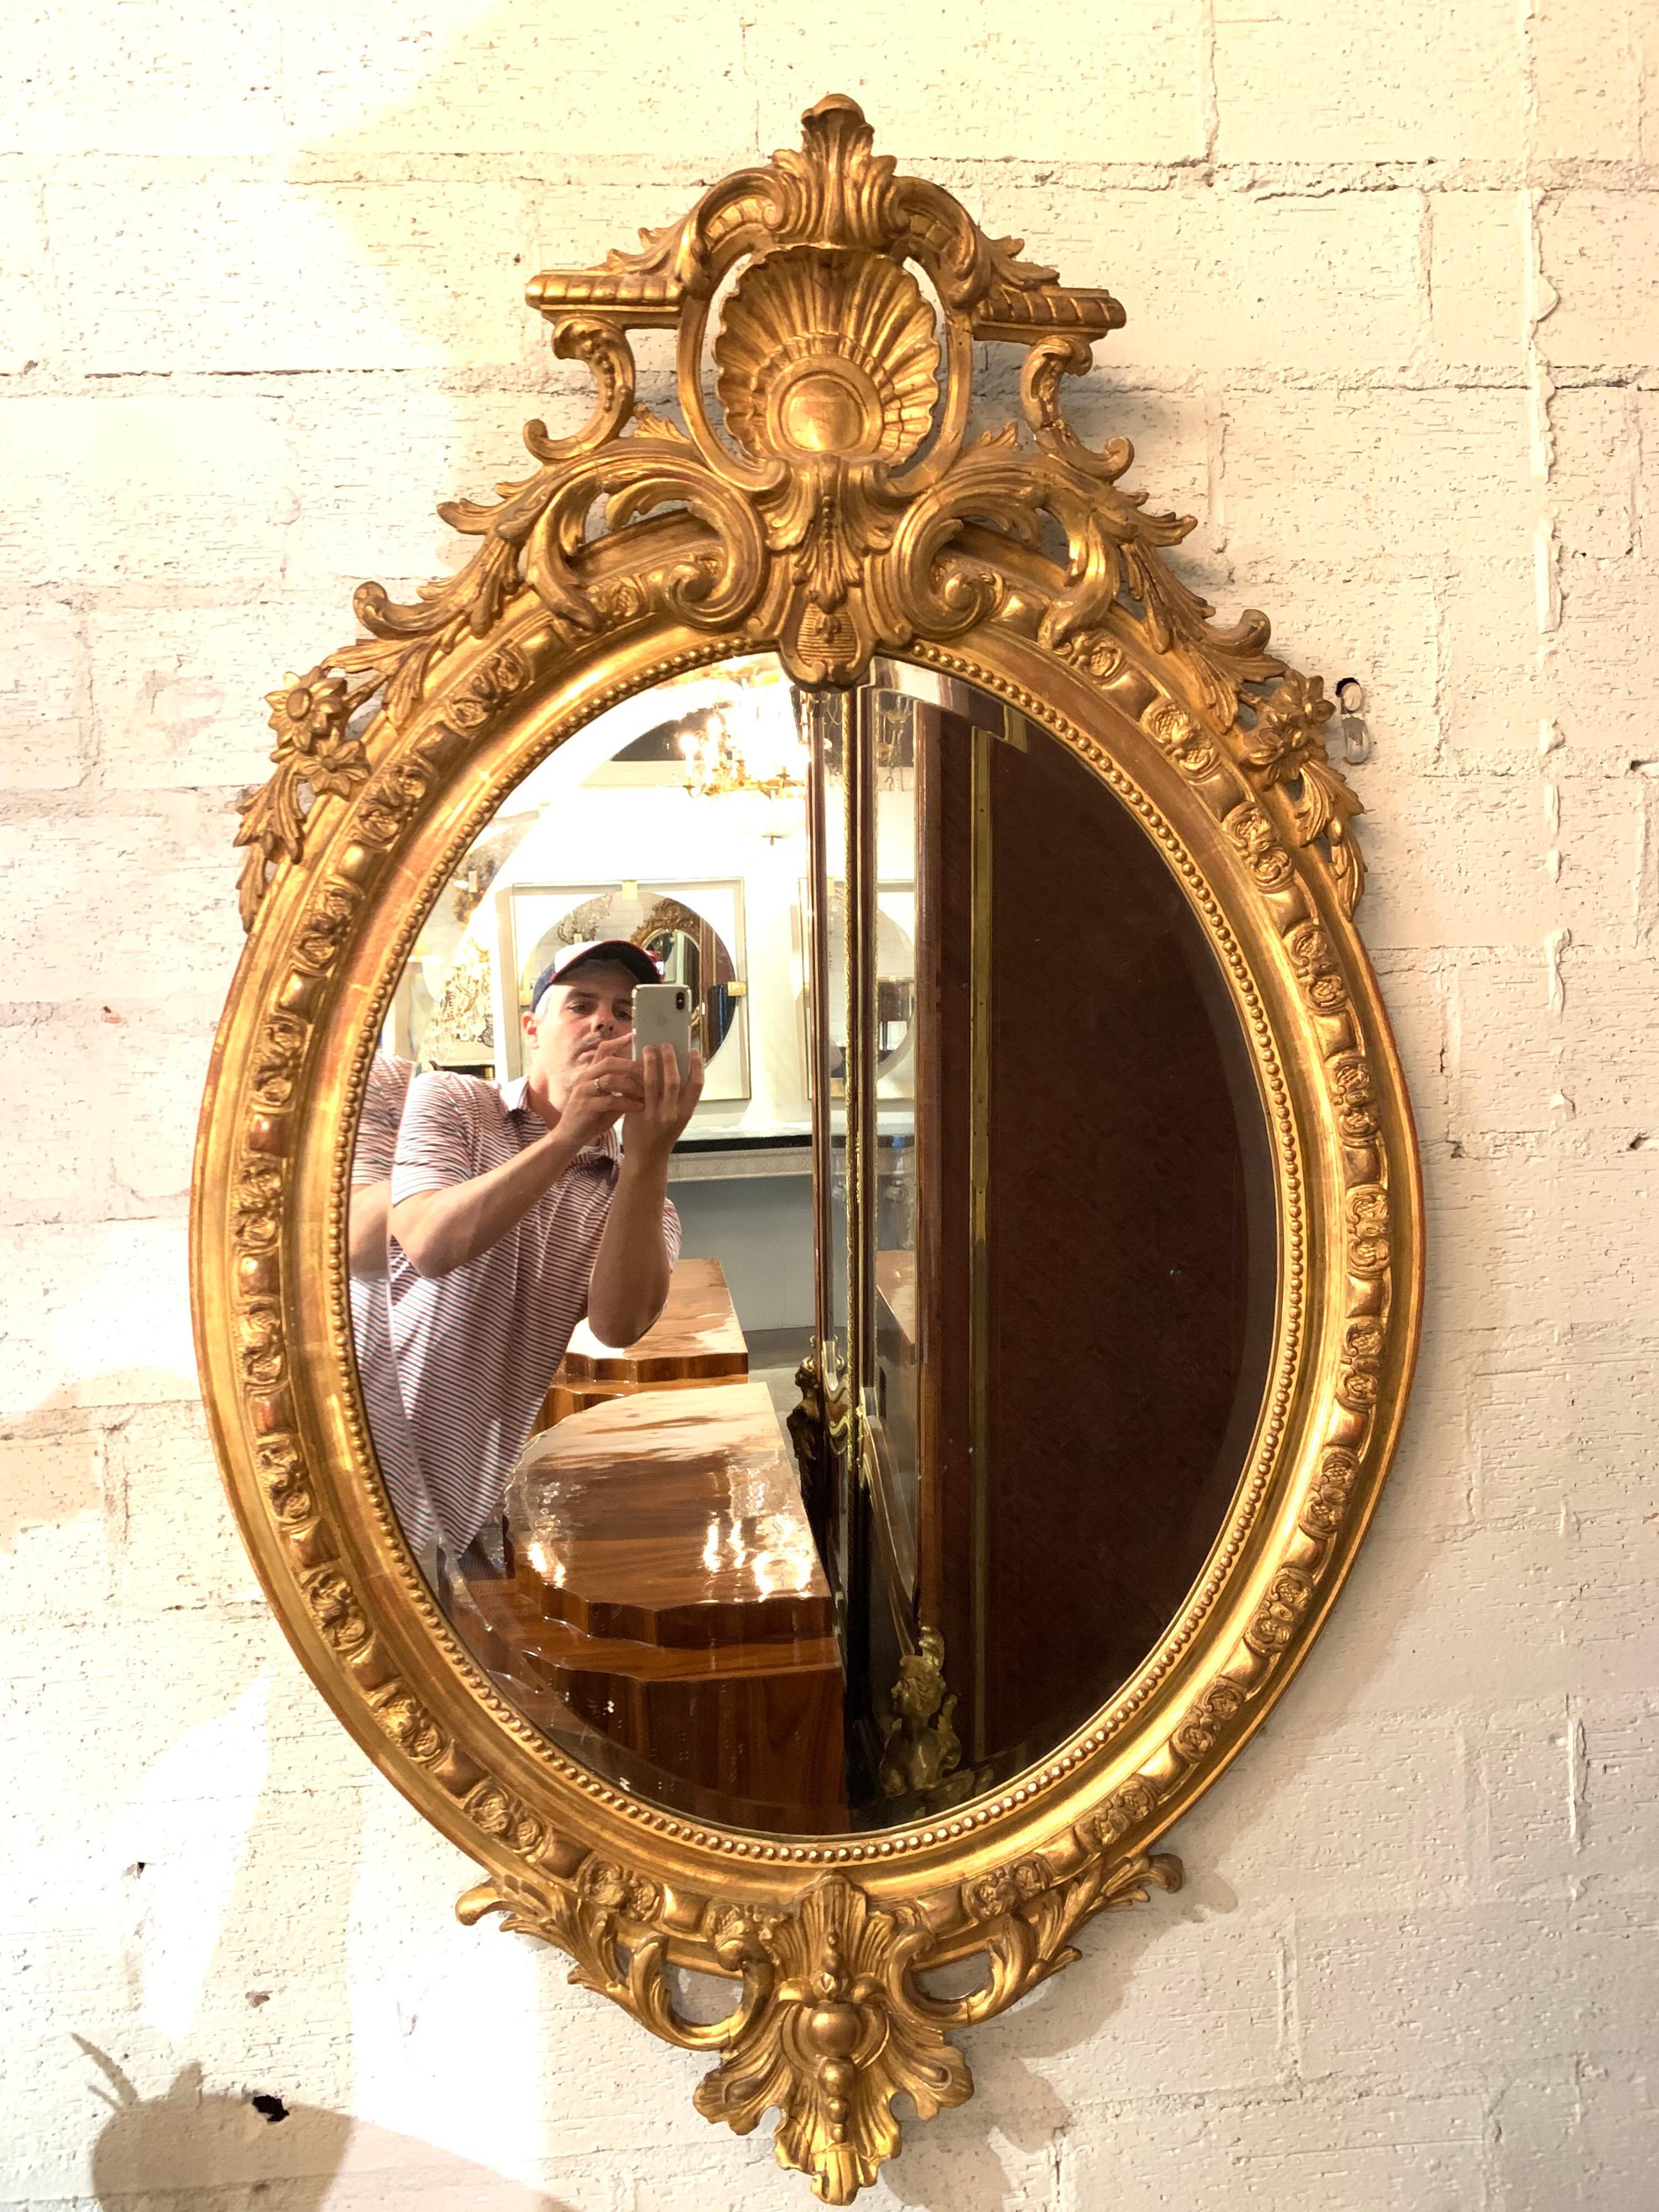 Beautiful 19th century French Louis XVI giltwood and gesso oval mirror. Exceptional details including a crest, floral images and beaded border. Very fine quality!